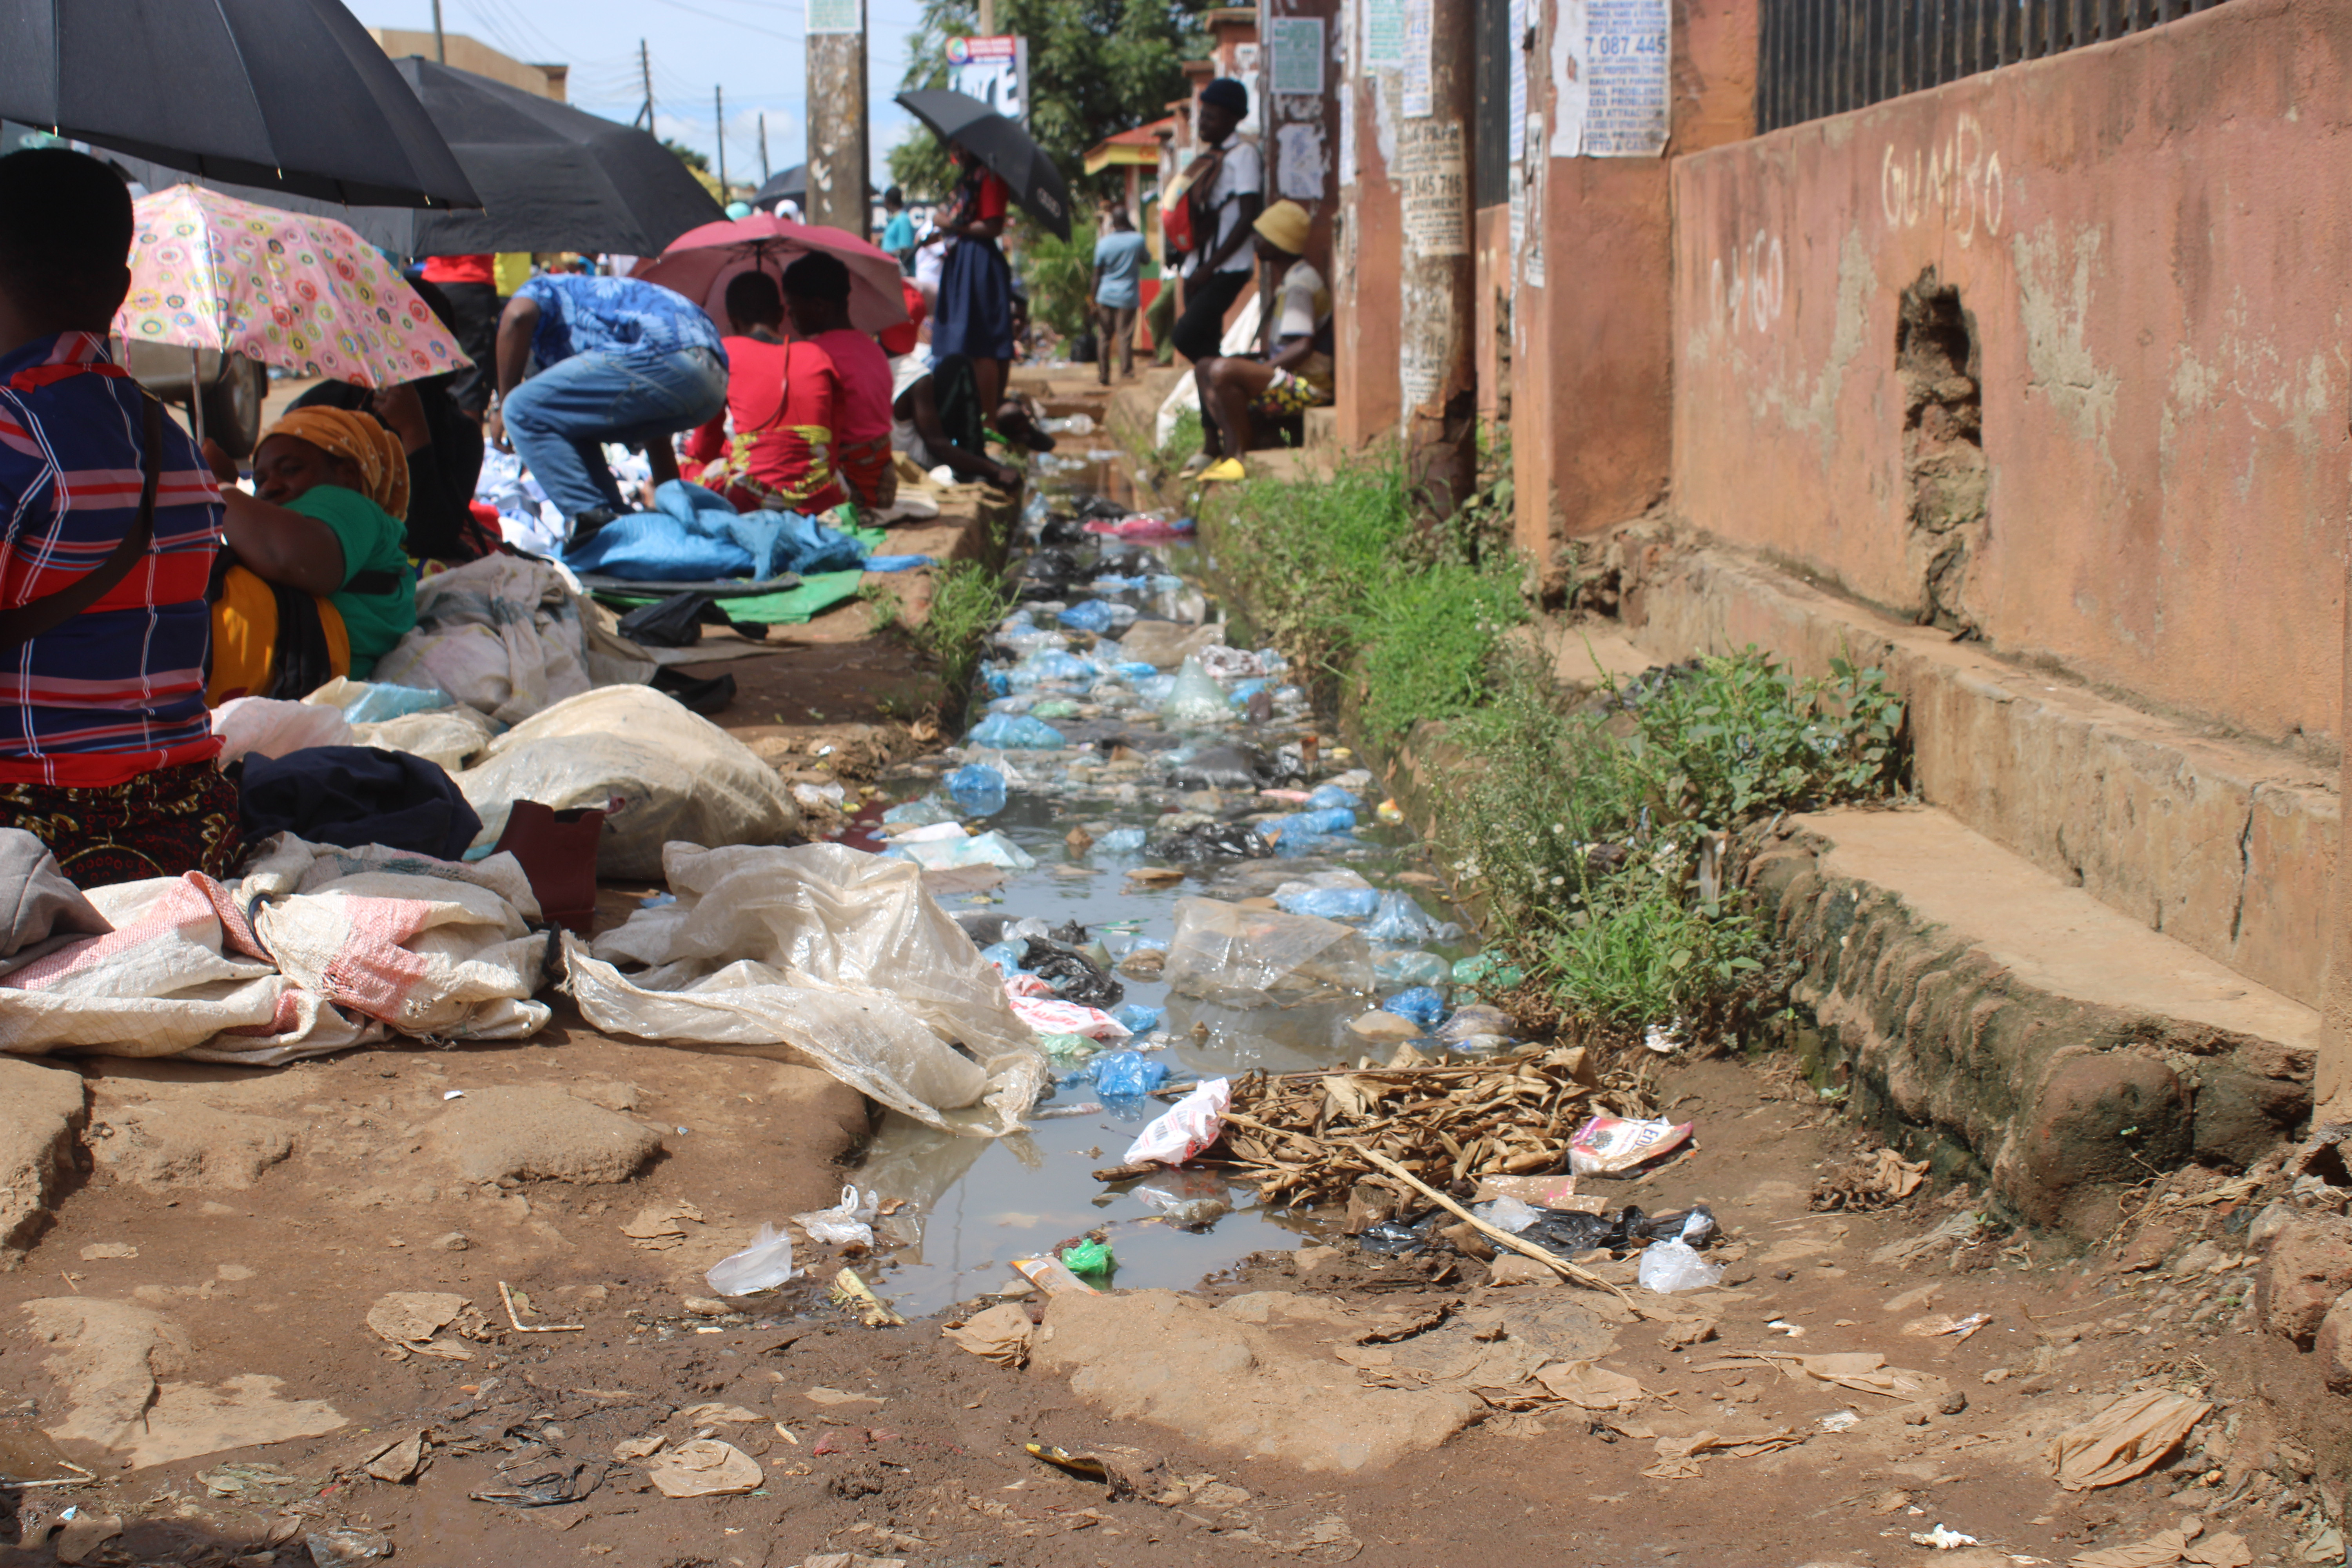 Vendors selling clothes and other merchandise in the city of Lilongwe, Malawi. Behind them is polluted water. Poor drainage facilities is one of the problems in the cities. January 11, 2023. Kondwani Magombo/Thomson Reuters Foundation